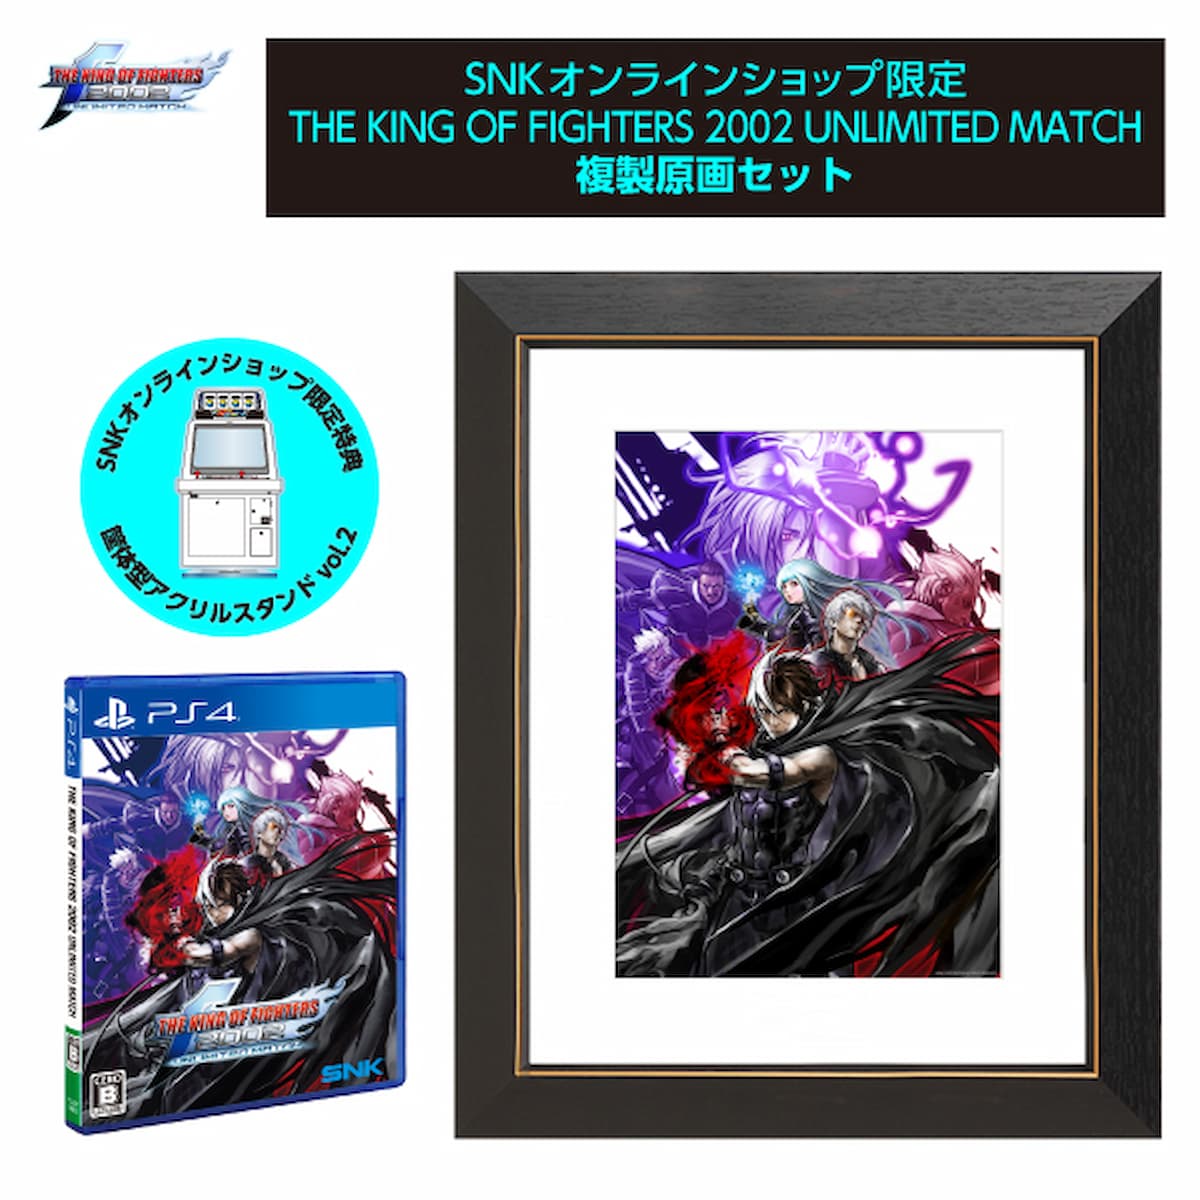 THE KING OF FIGHTERS 2002 UNLIMITED MATCH 複製原画セット - PS4